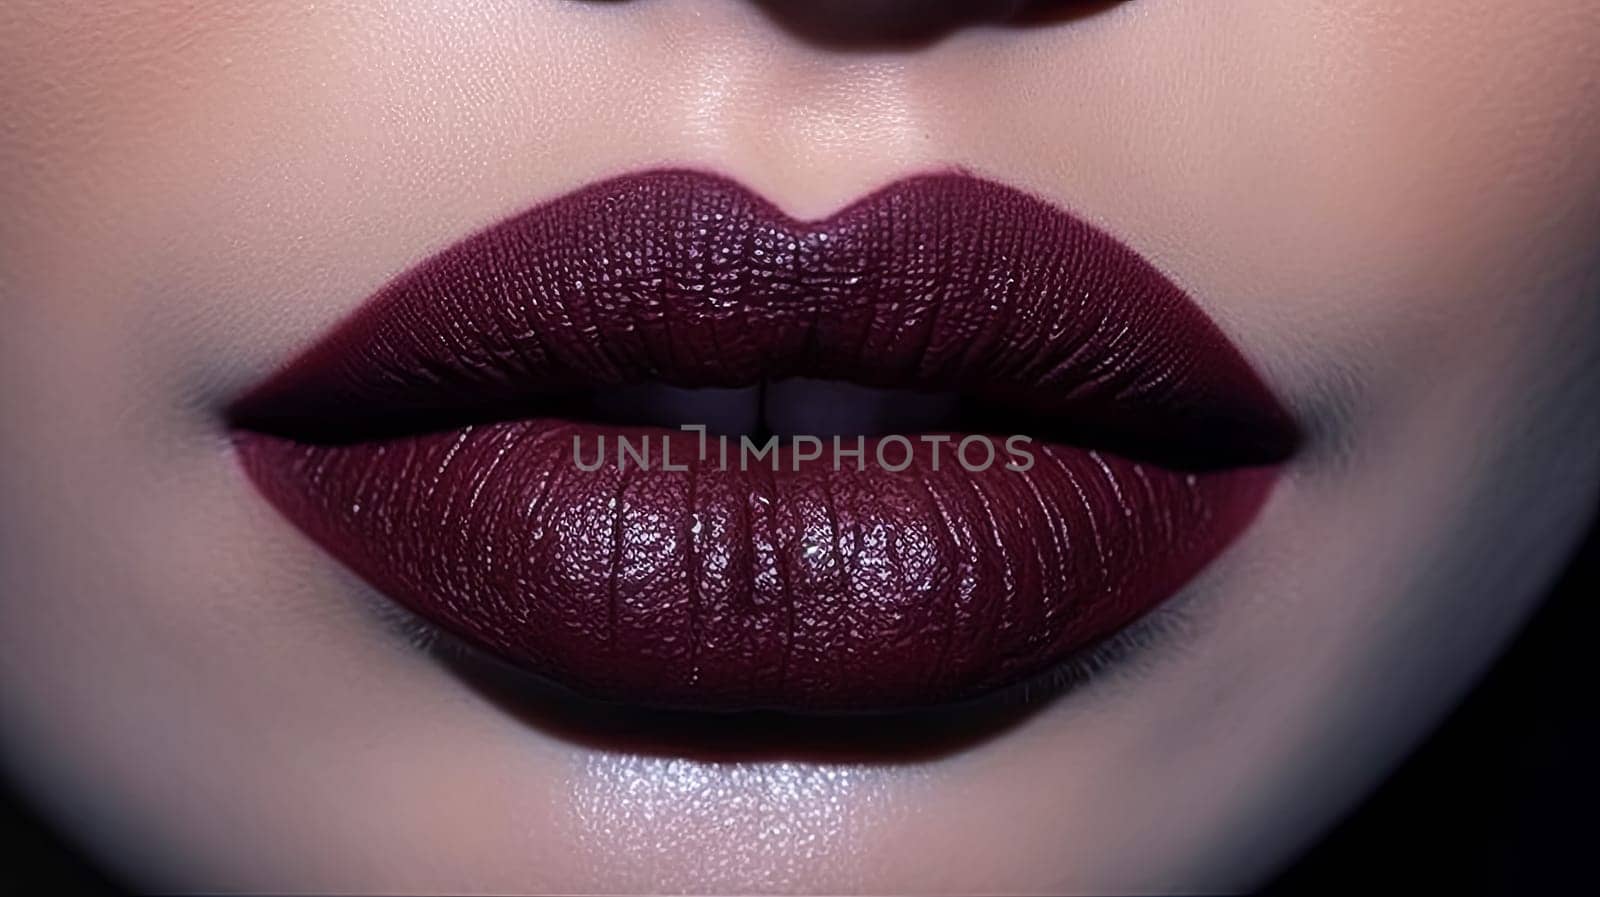 A woman's lips are painted a deep burgundy color. The lips are full and plump, giving the impression of a seductive and confident woman. Concept of glamour and allure